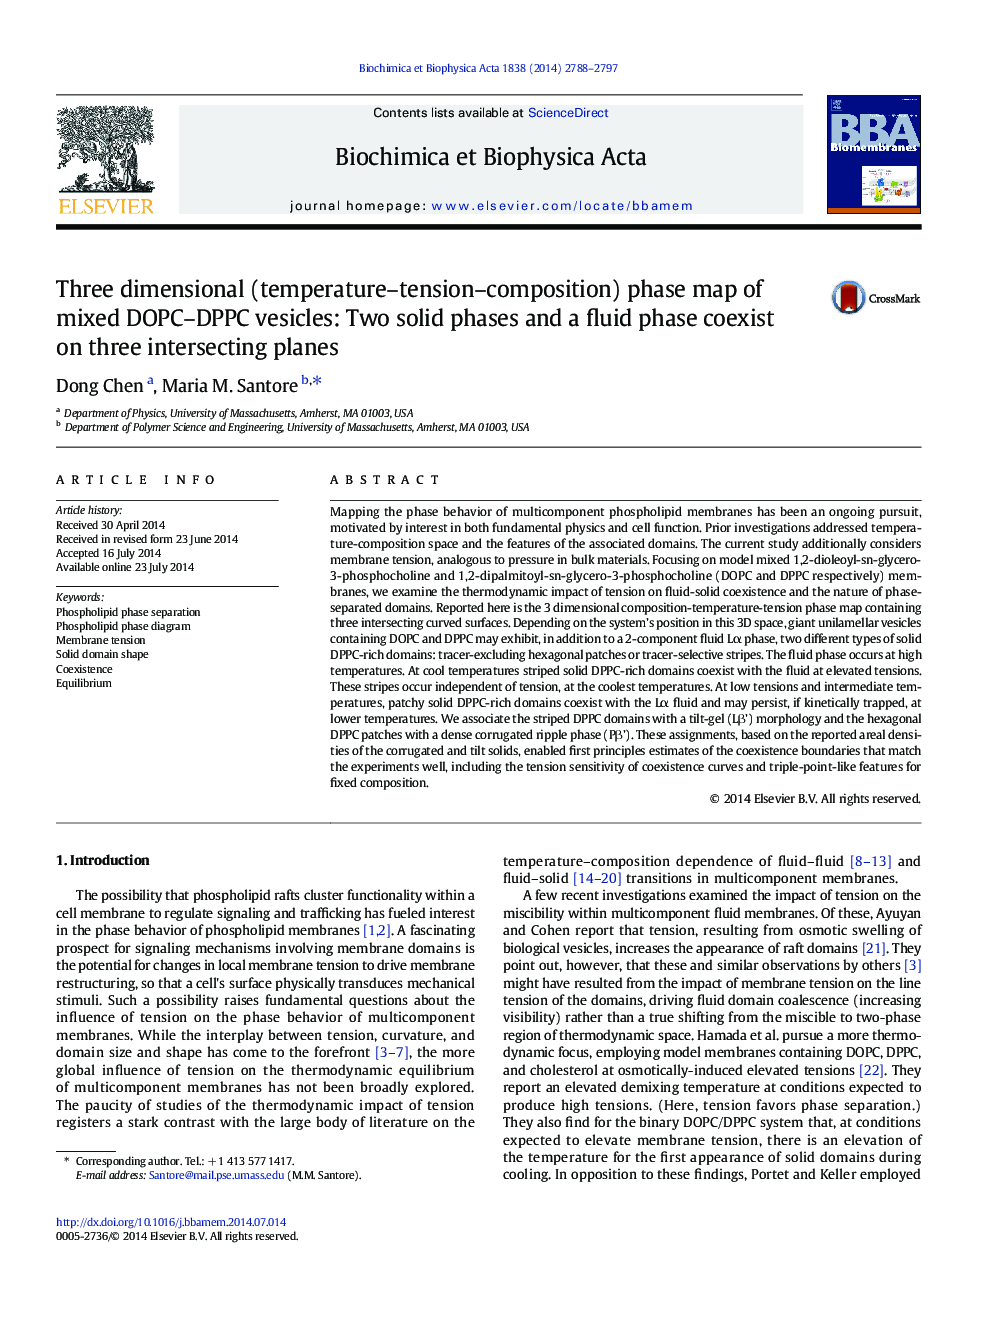 Three dimensional (temperature-tension-composition) phase map of mixed DOPC-DPPC vesicles: Two solid phases and a fluid phase coexist on three intersecting planes